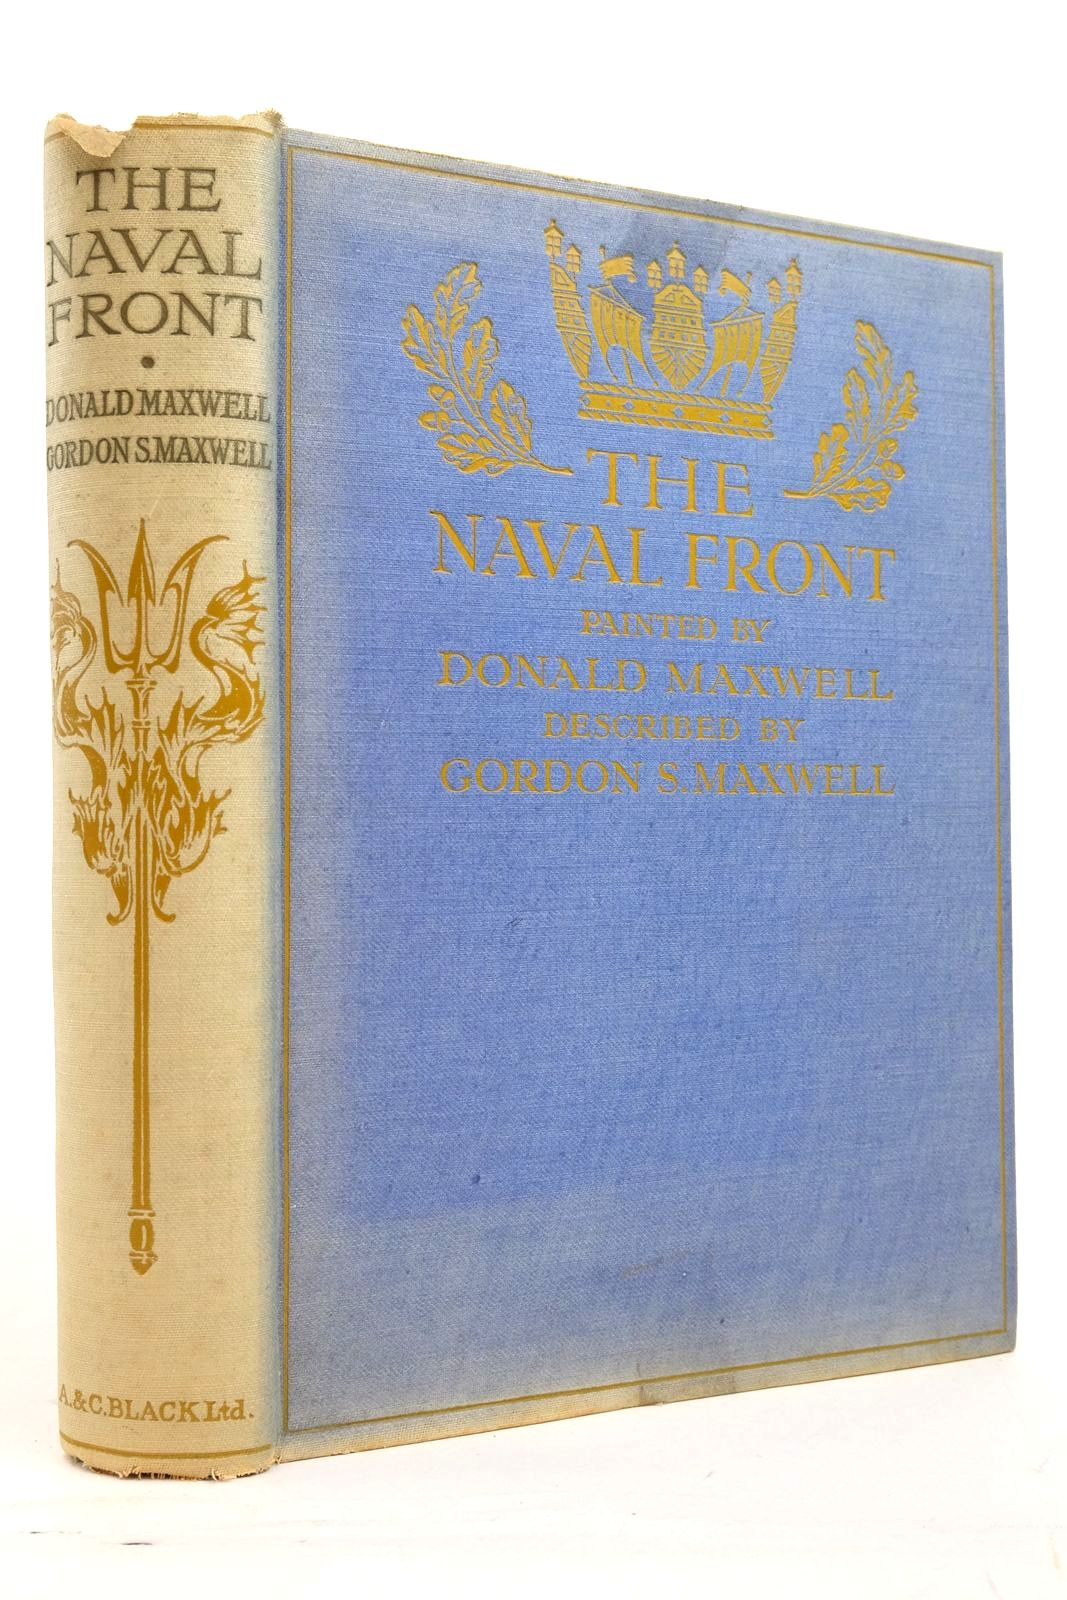 Photo of THE NAVAL FRONT written by Maxwell, Gordon S. illustrated by Maxwell, Donald published by A. &amp; C. Black Ltd. (STOCK CODE: 2137420)  for sale by Stella & Rose's Books